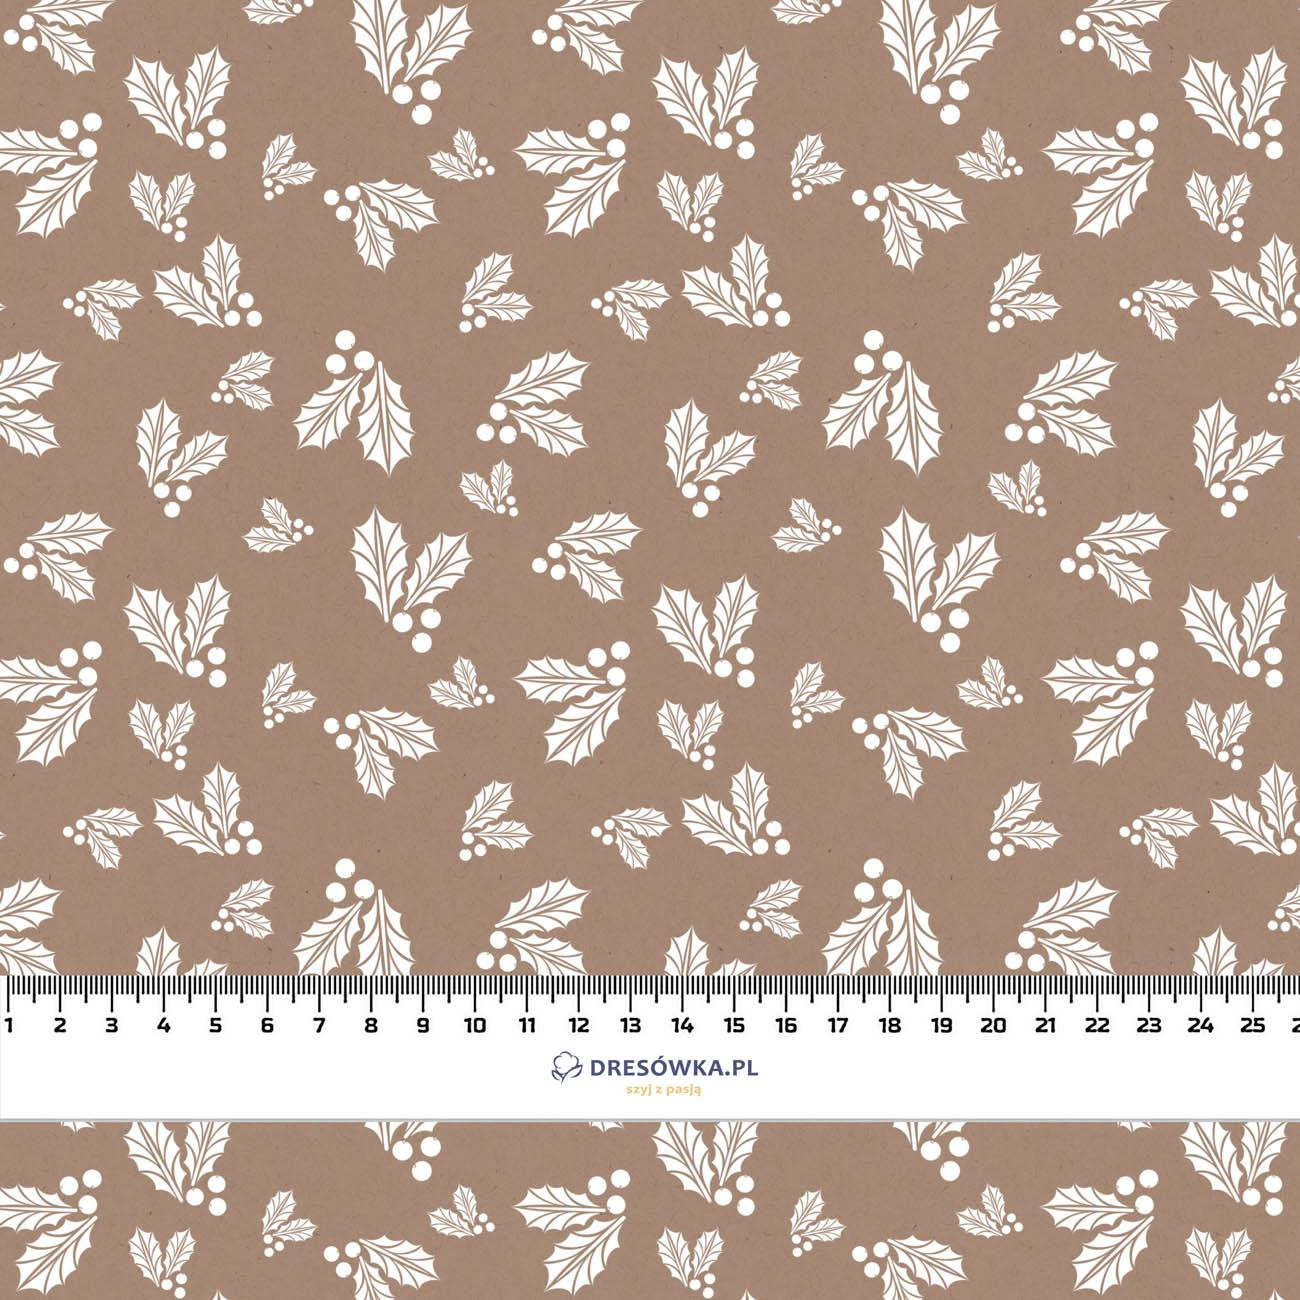 HOLLY (WHITE CHRISTMAS) - Cotton woven fabric